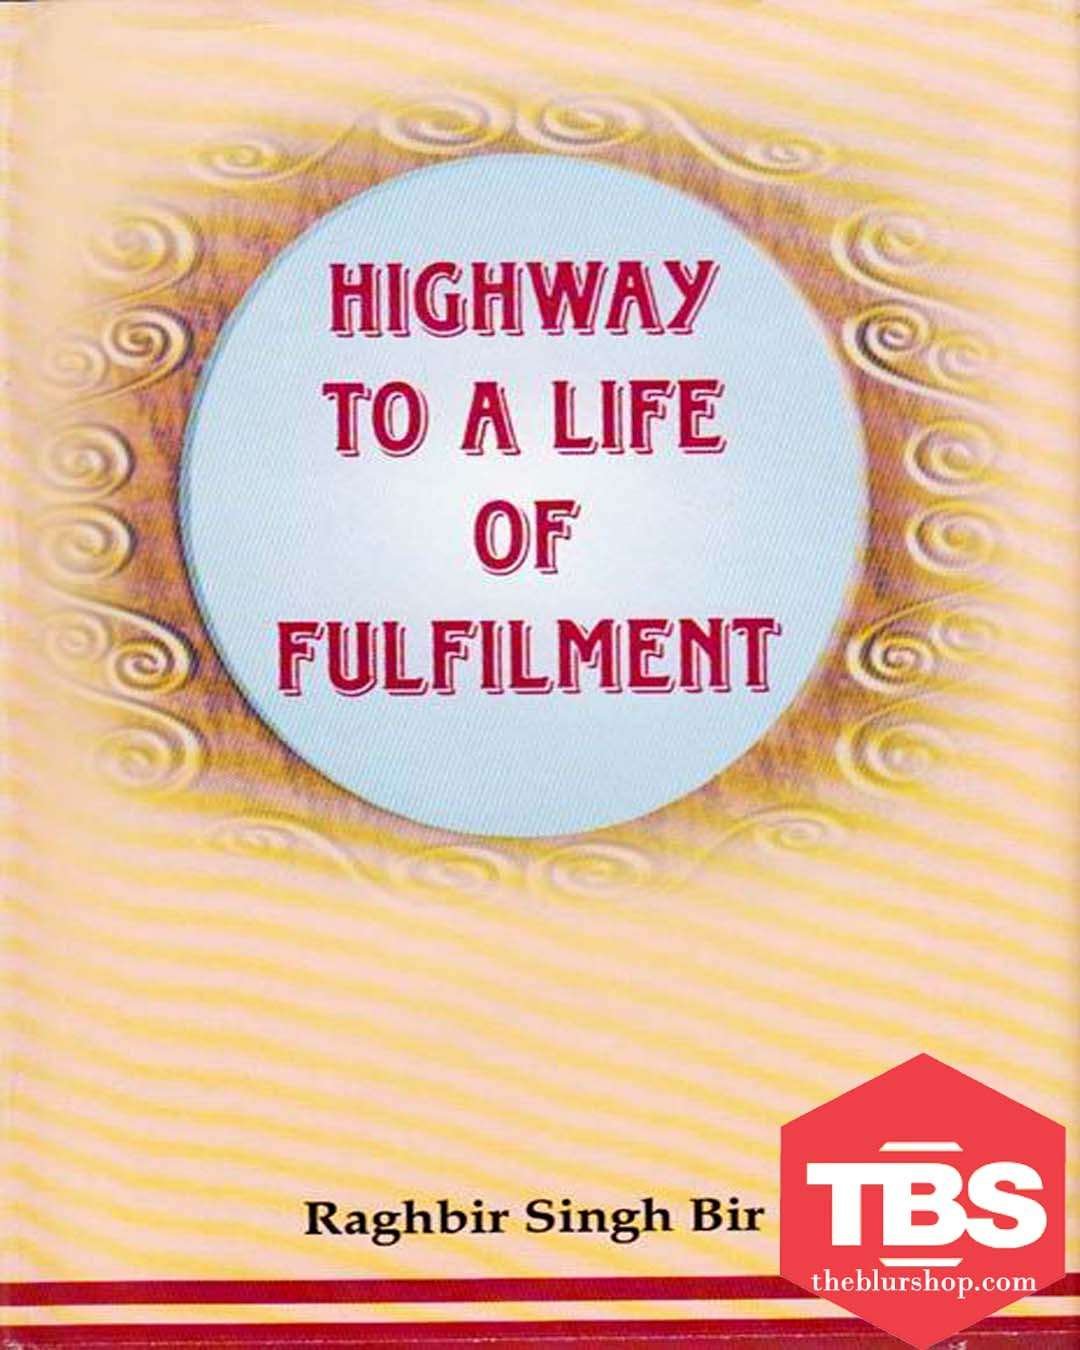 Highway To A Life of Fulfilment